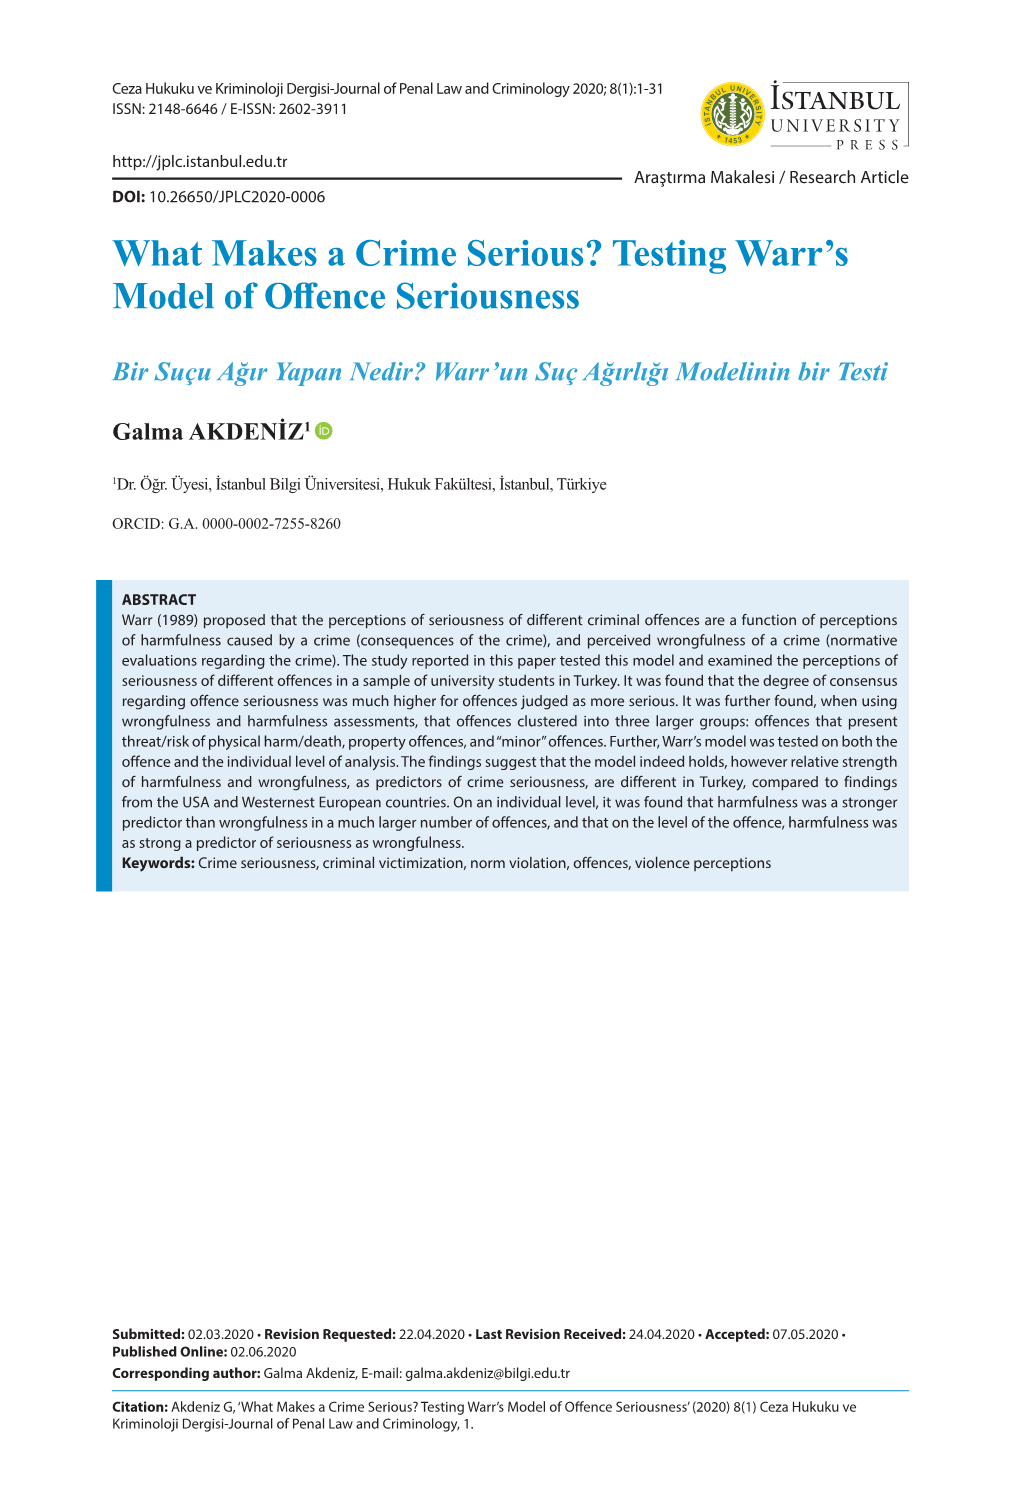 What Makes a Crime Serious? Testing Warr's Model of Offence Seriousness